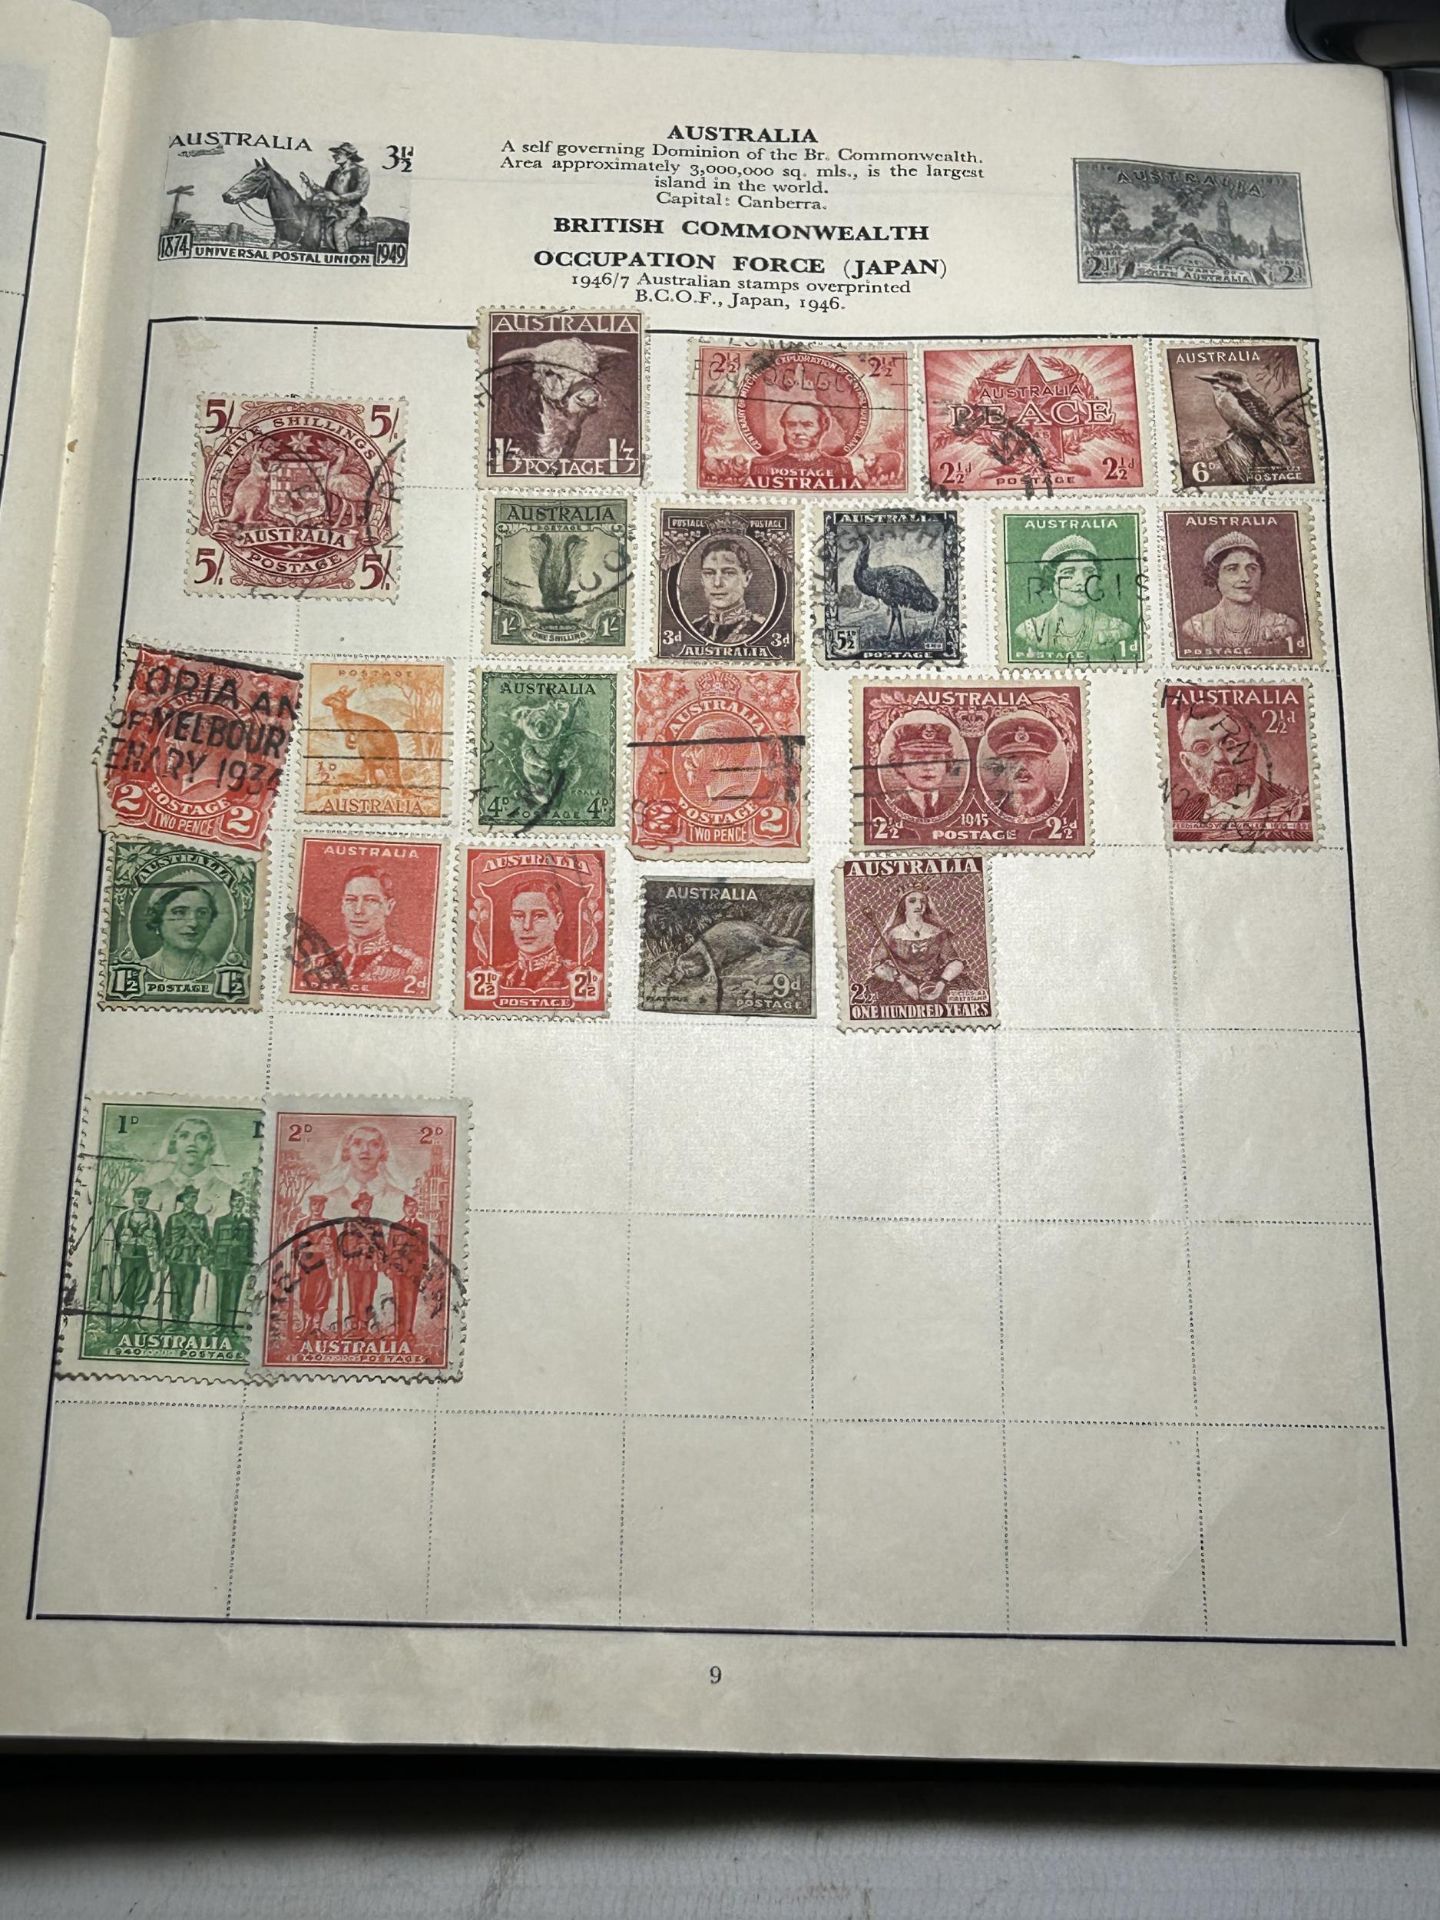 A CAVALIER STAMP ALBUM CONTAINING A COLLECTION OF VARIOUS WORLD STAMPS